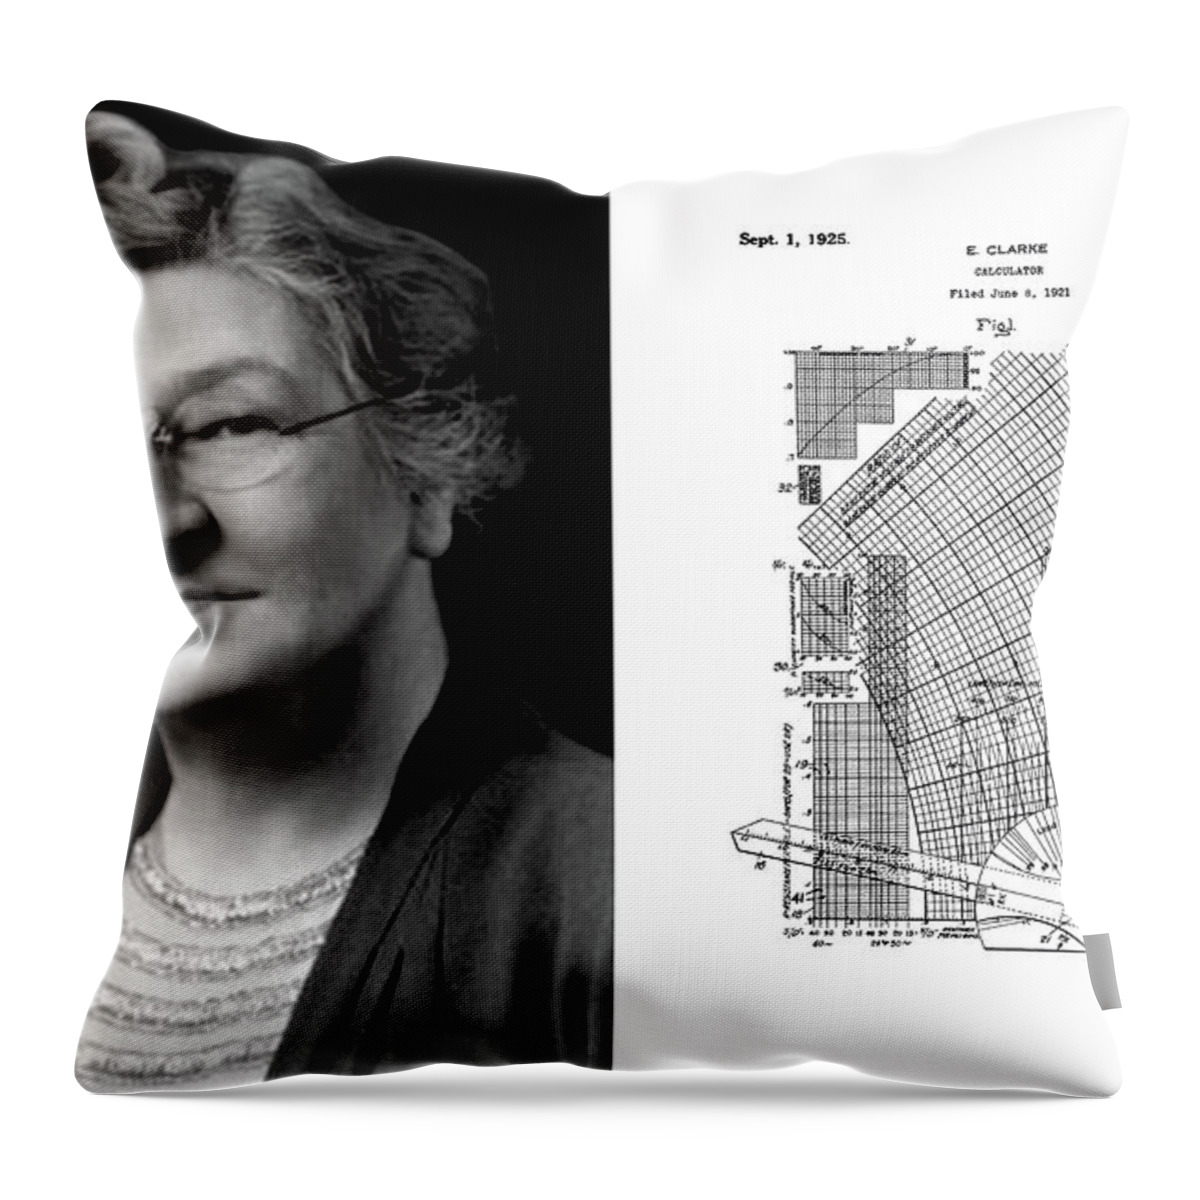 20th Century Throw Pillow featuring the photograph Edith Clarke, American Electrical by Science Source